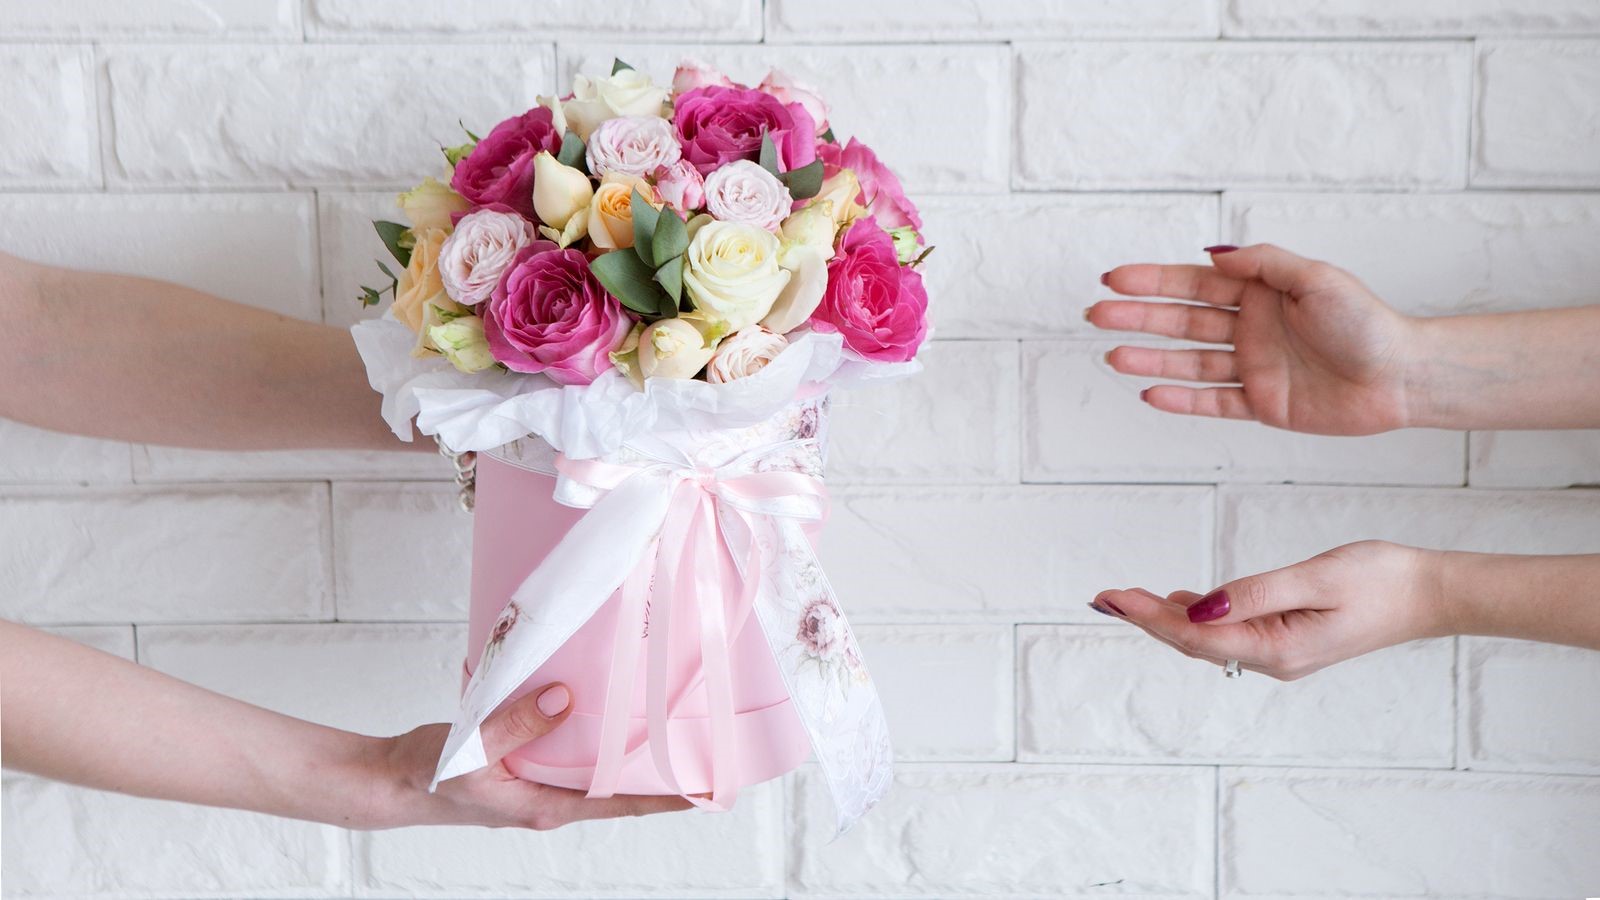 Send Flowers to Loved Ones with the Right Selection for the Occasion